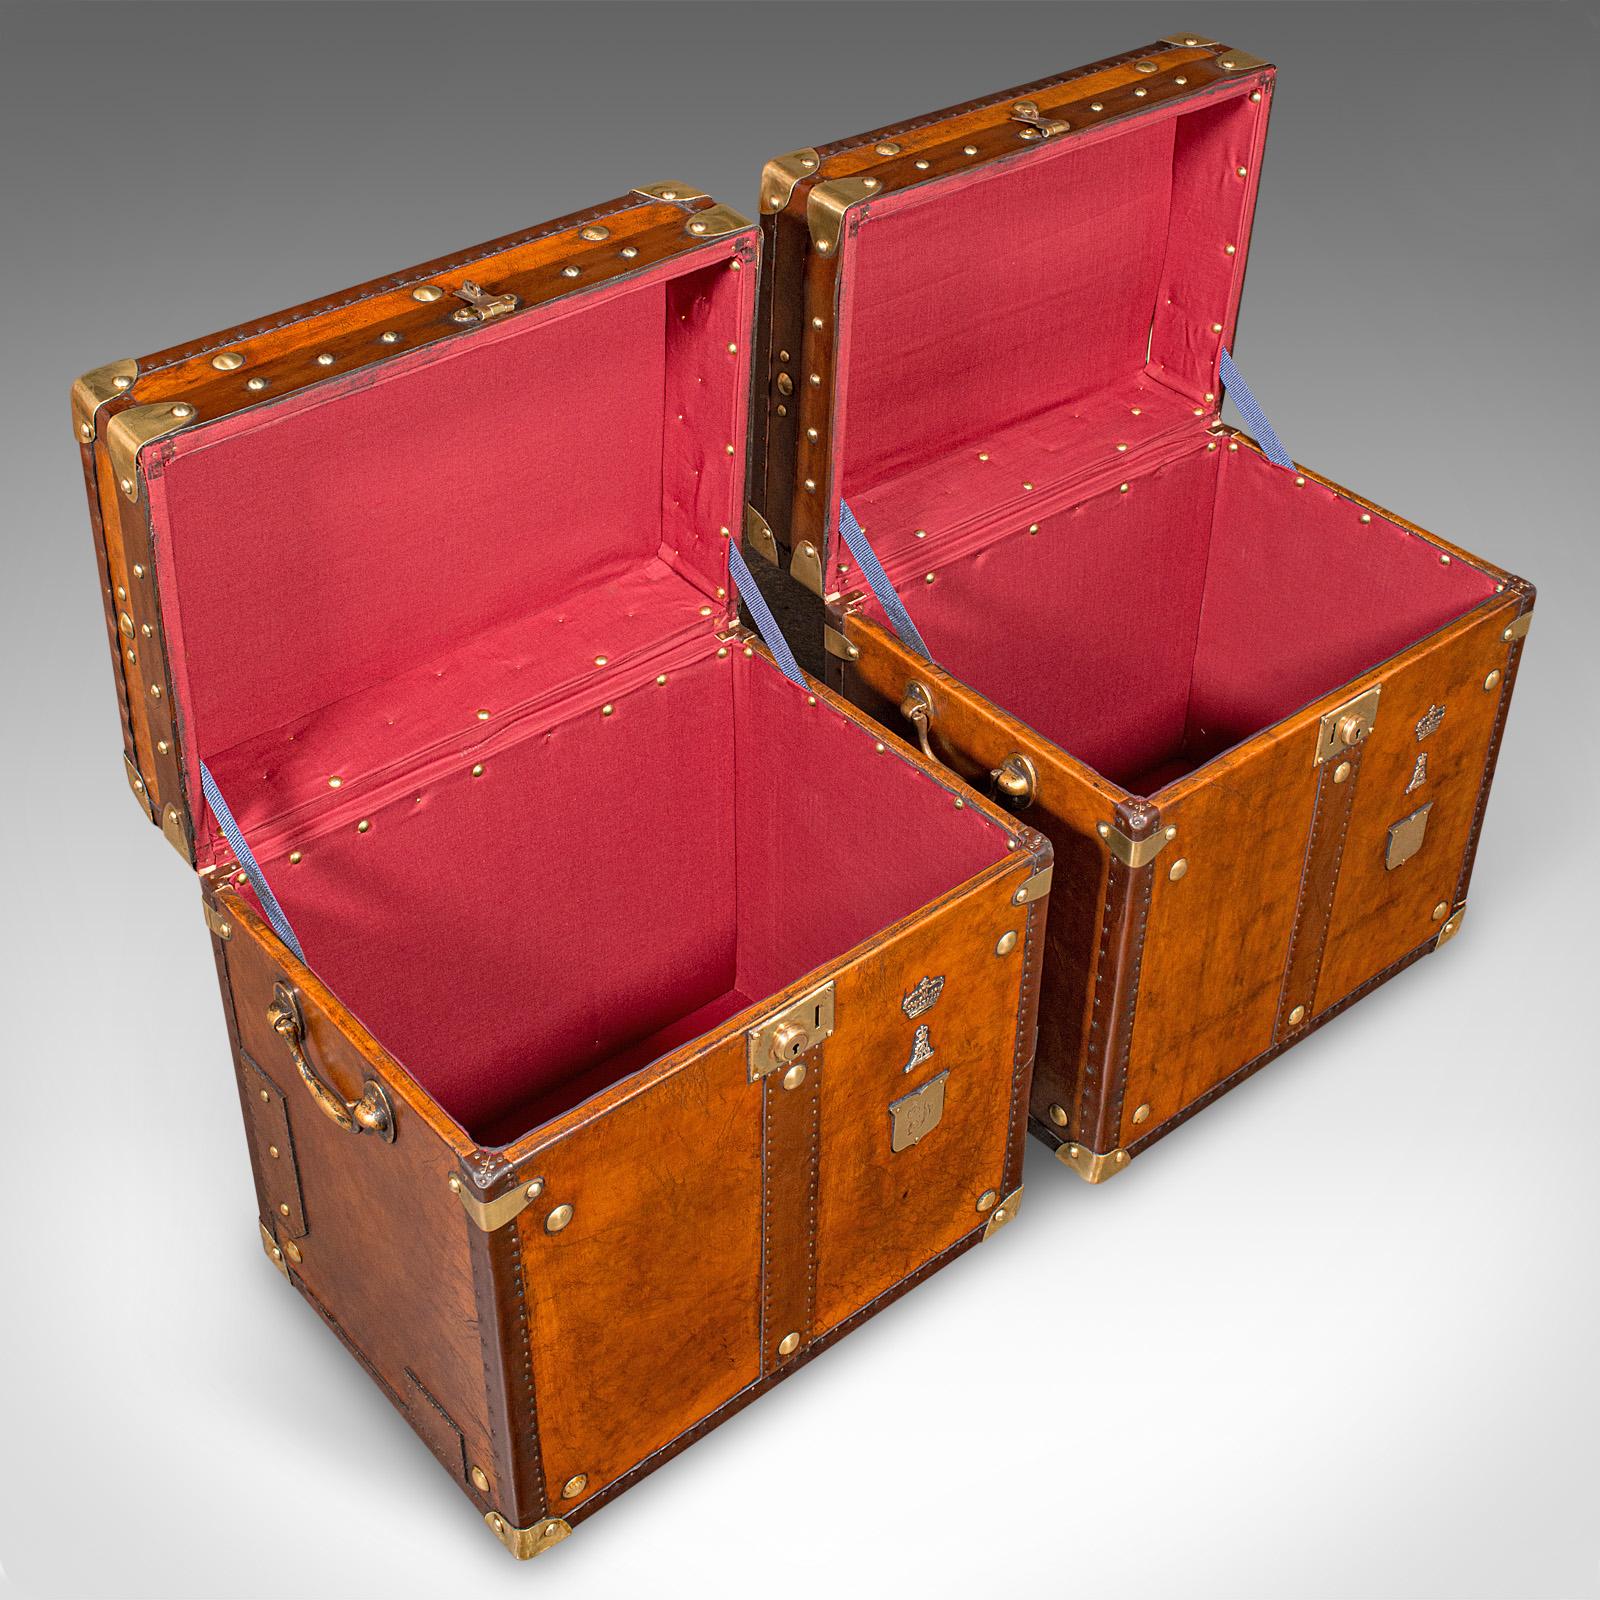 Pair Of Vintage Campaign Luggage Cases, English, Leather, Bedroom Nightstands For Sale 2